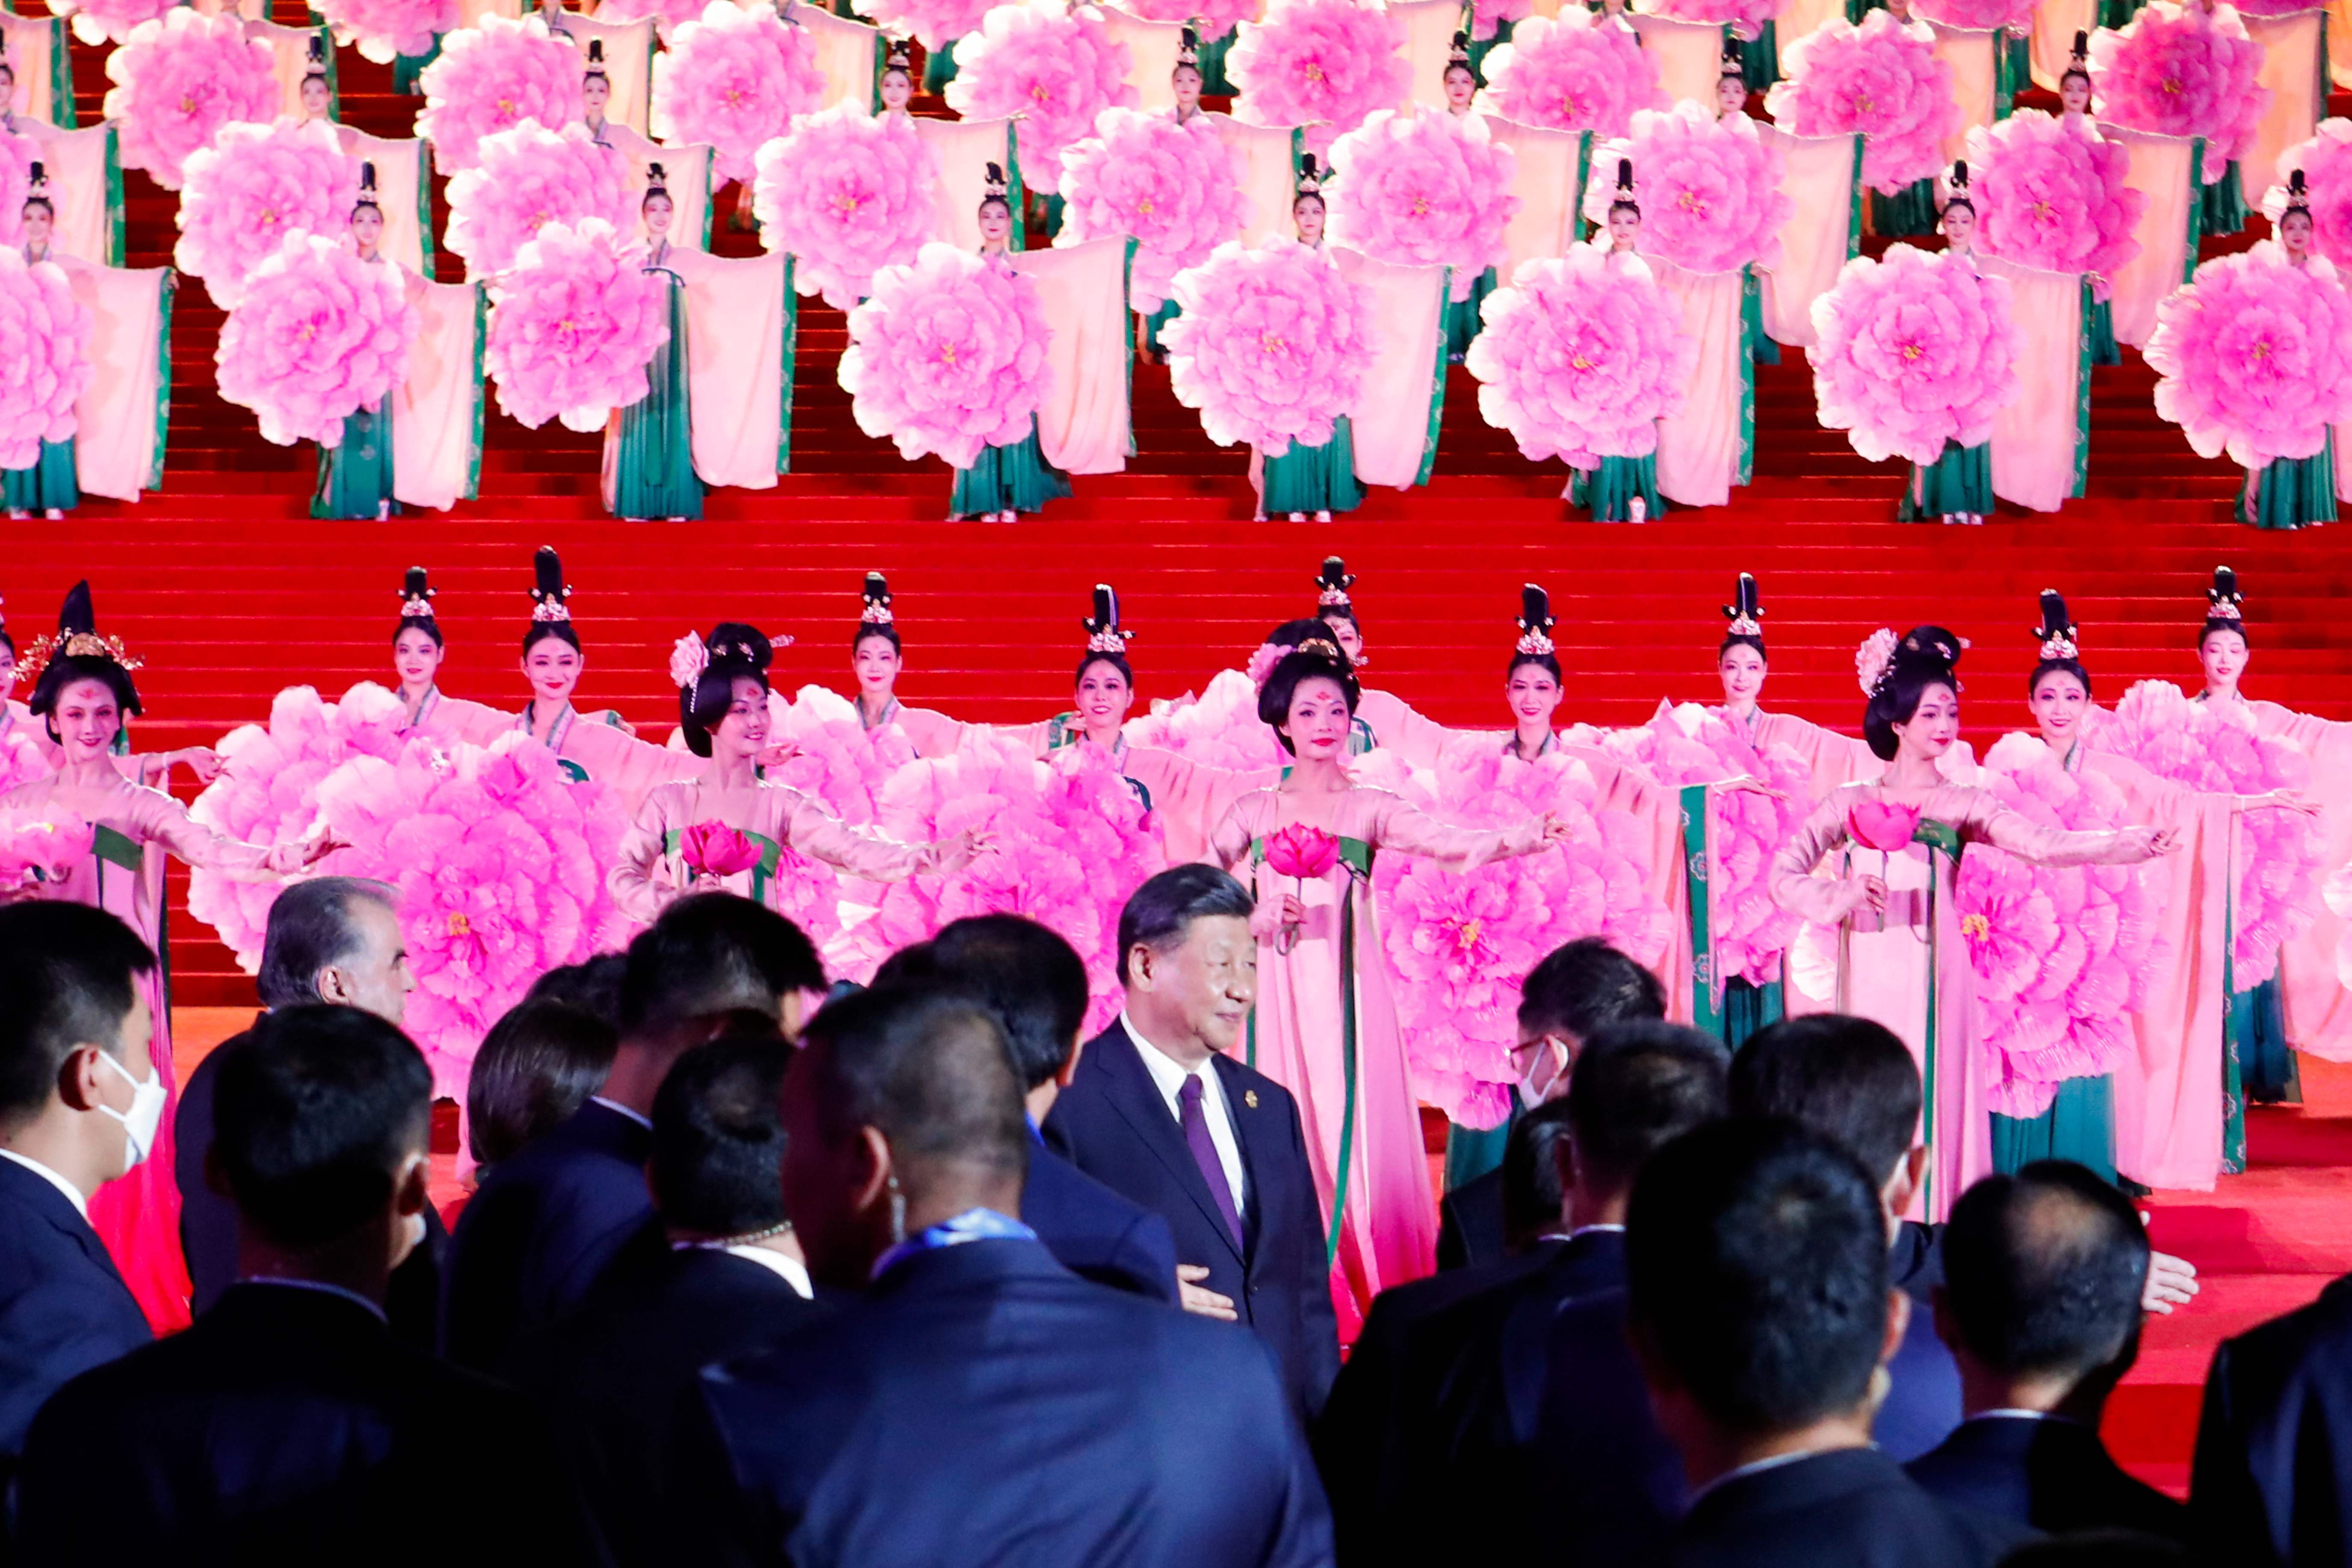 Chinese President Xi Jinping arrives for the welcome ceremony for the China-Central Asia summit in Xian, Shaanxi province on May 18, 2023. (Photo by FLORENCE LO / POOL / AFP)